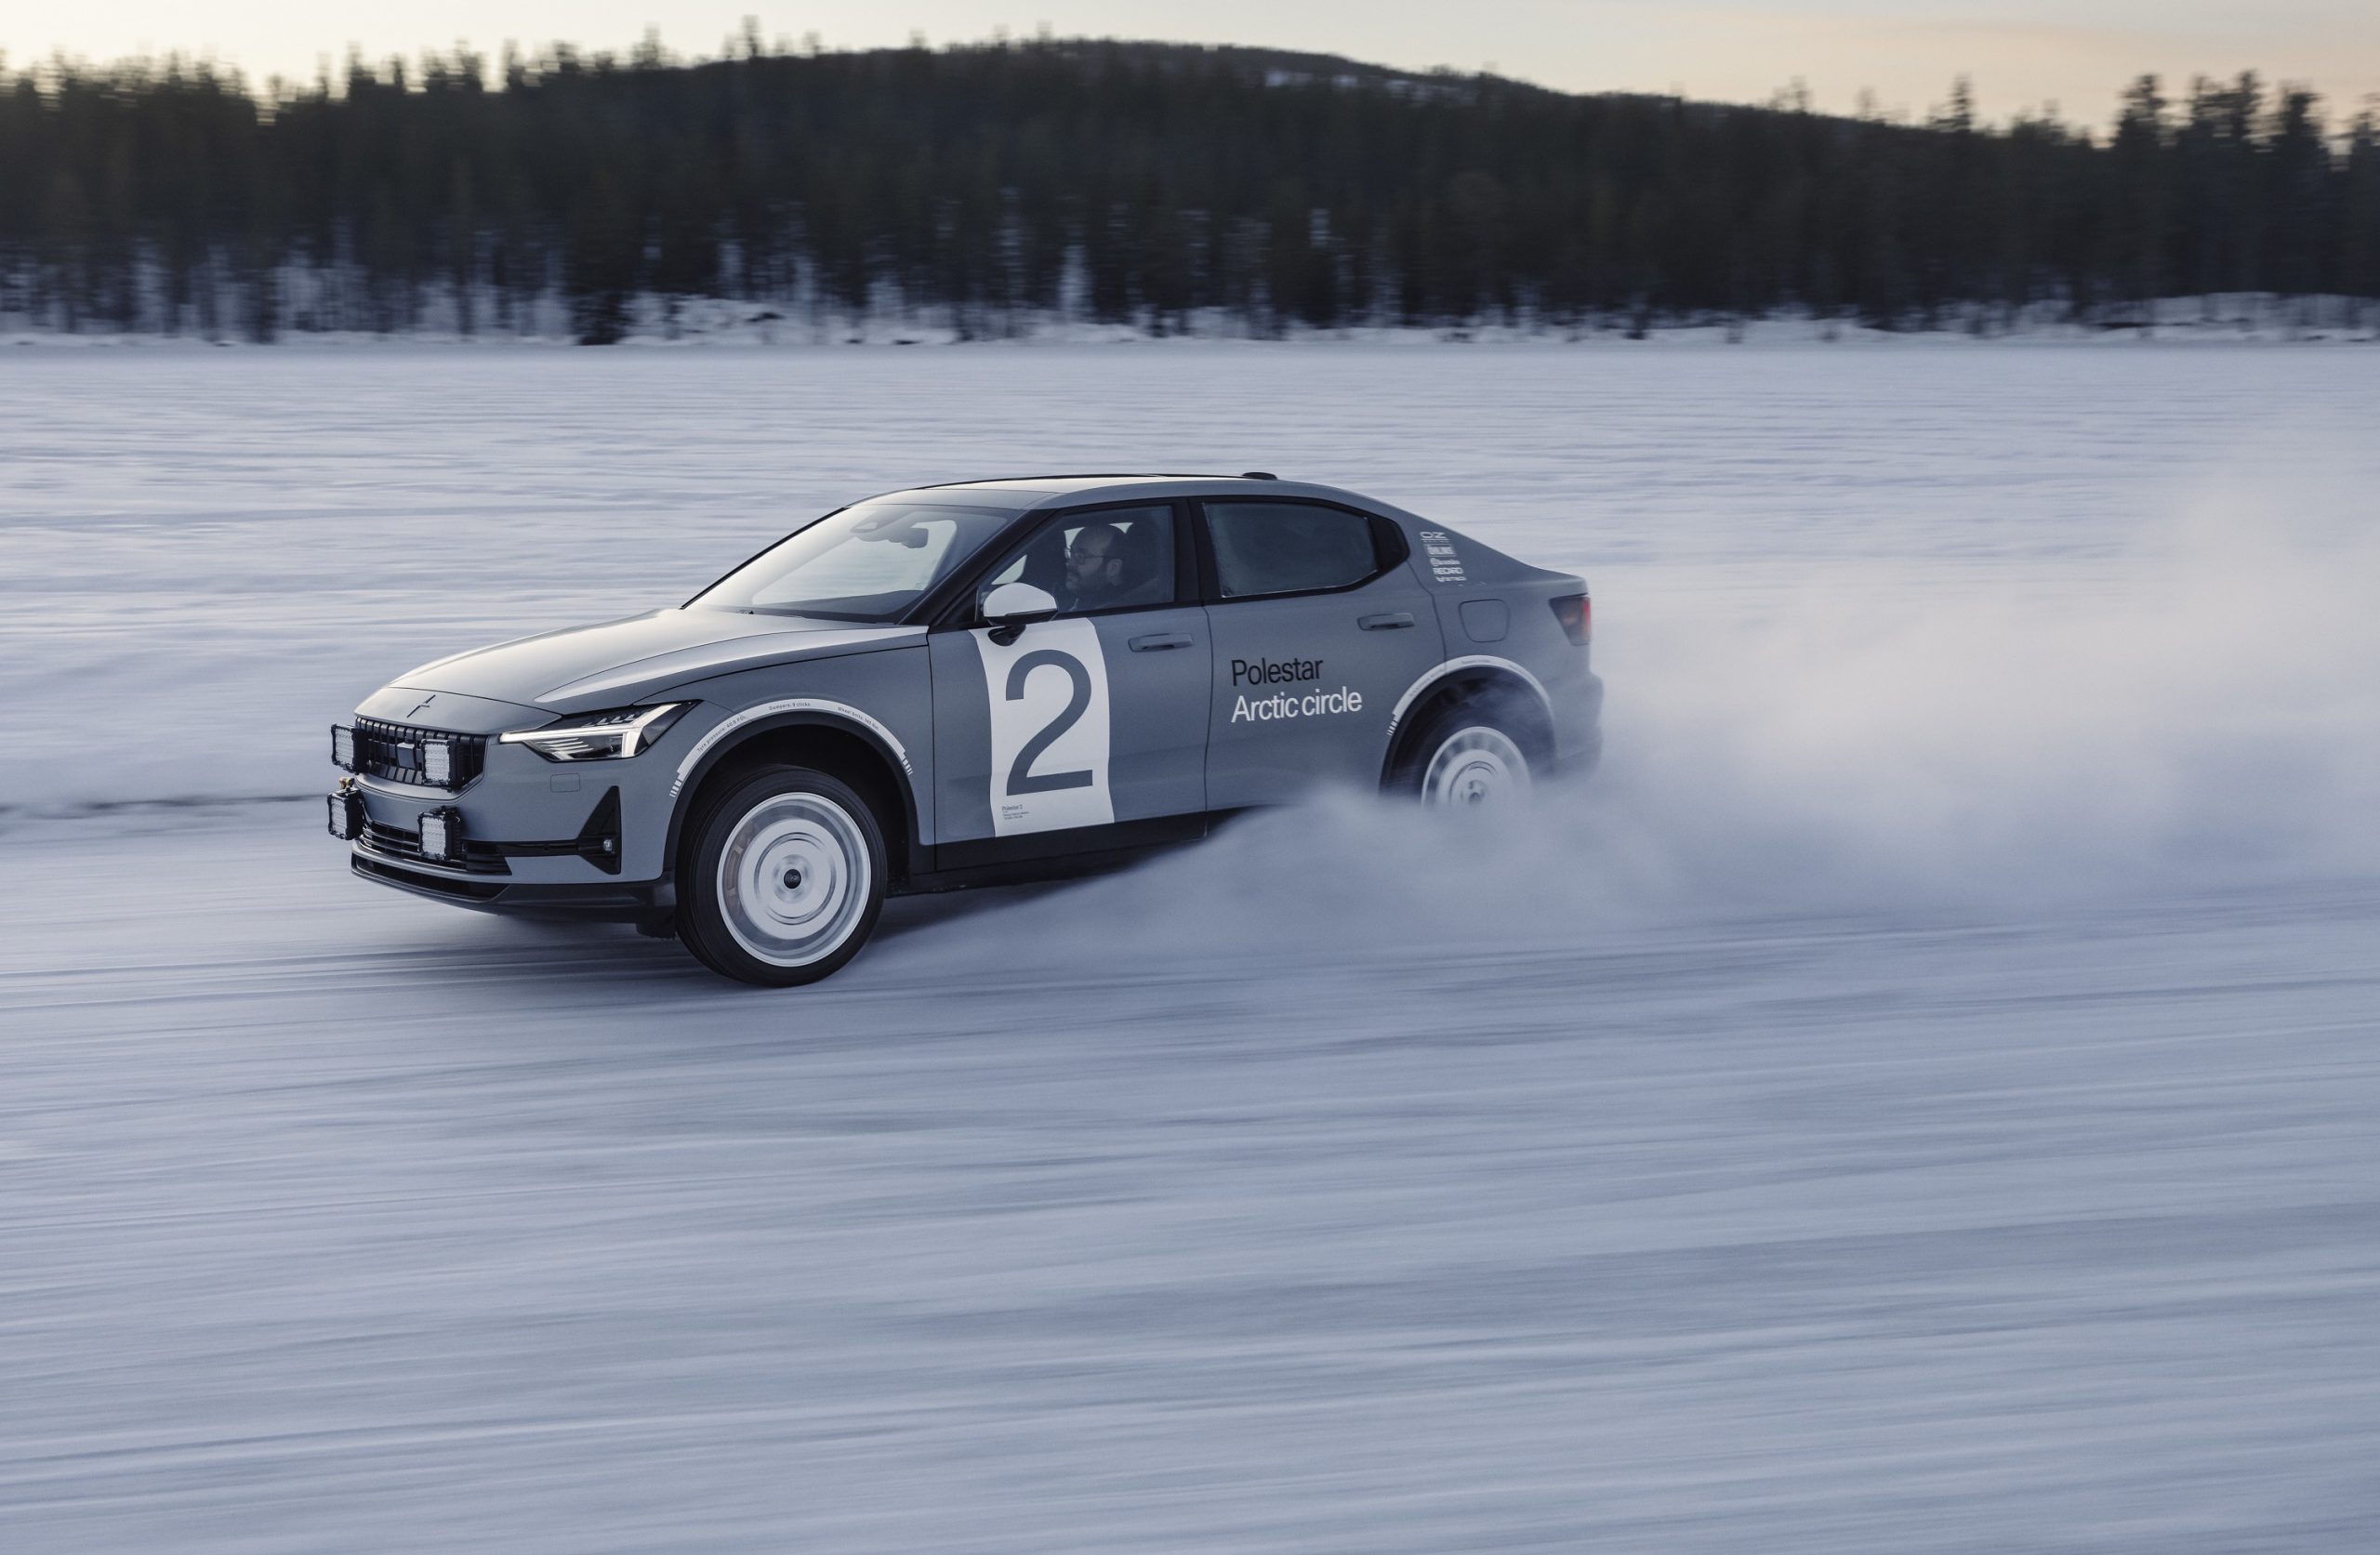 A Polestar 2 electric car undergoes winter testing in the Arctic Circle